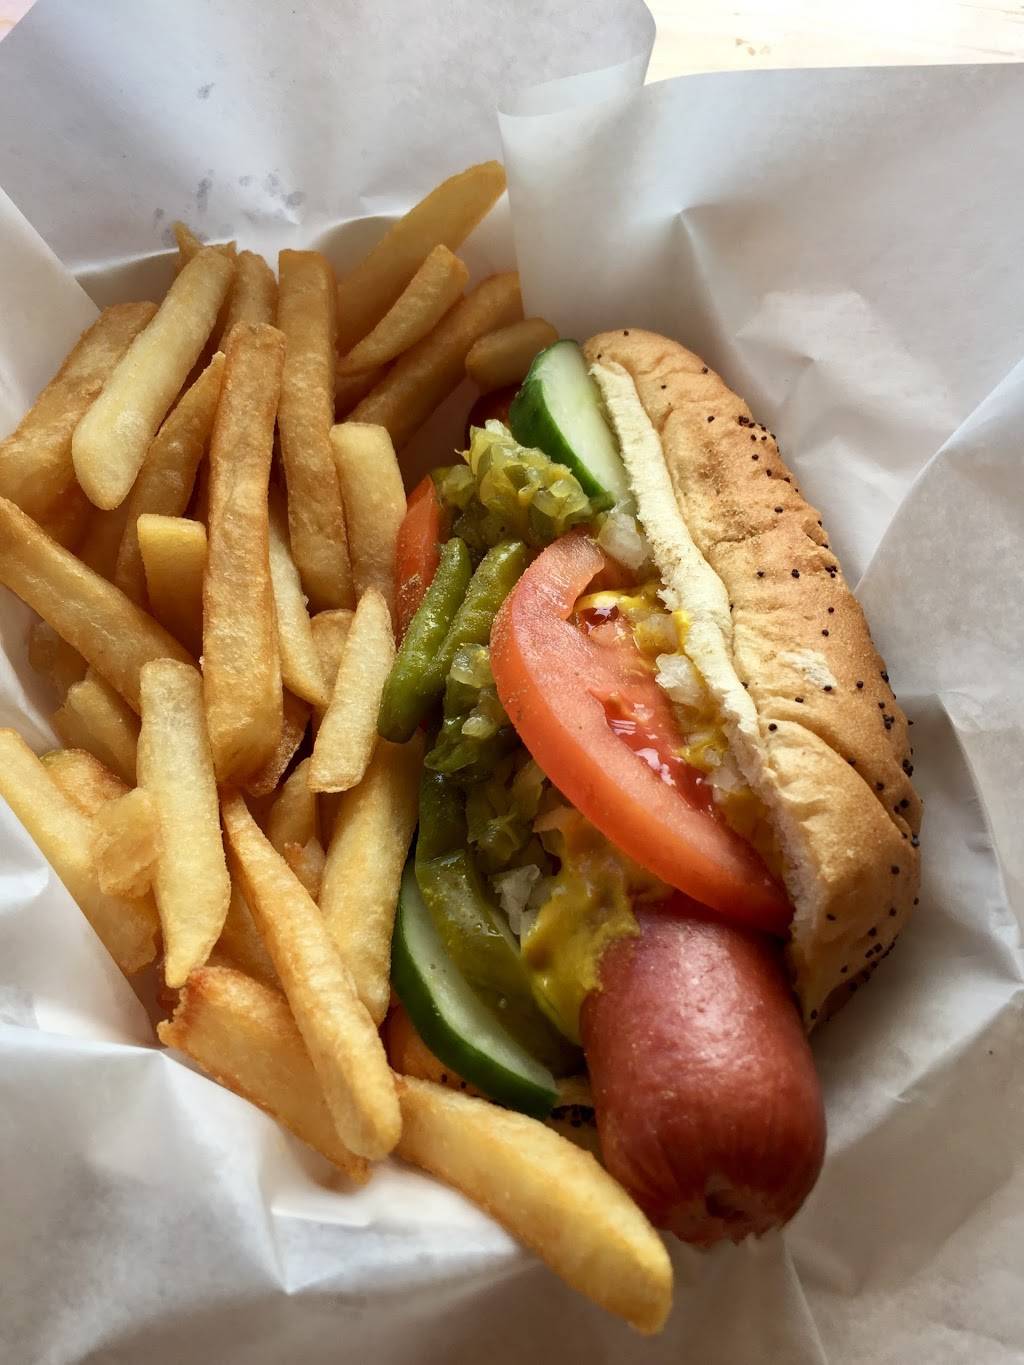 Skyway Doghouse | restaurant | 9480 S Ewing Ave, Chicago, IL 60617, USA | 7737312000 OR +1 773-731-2000